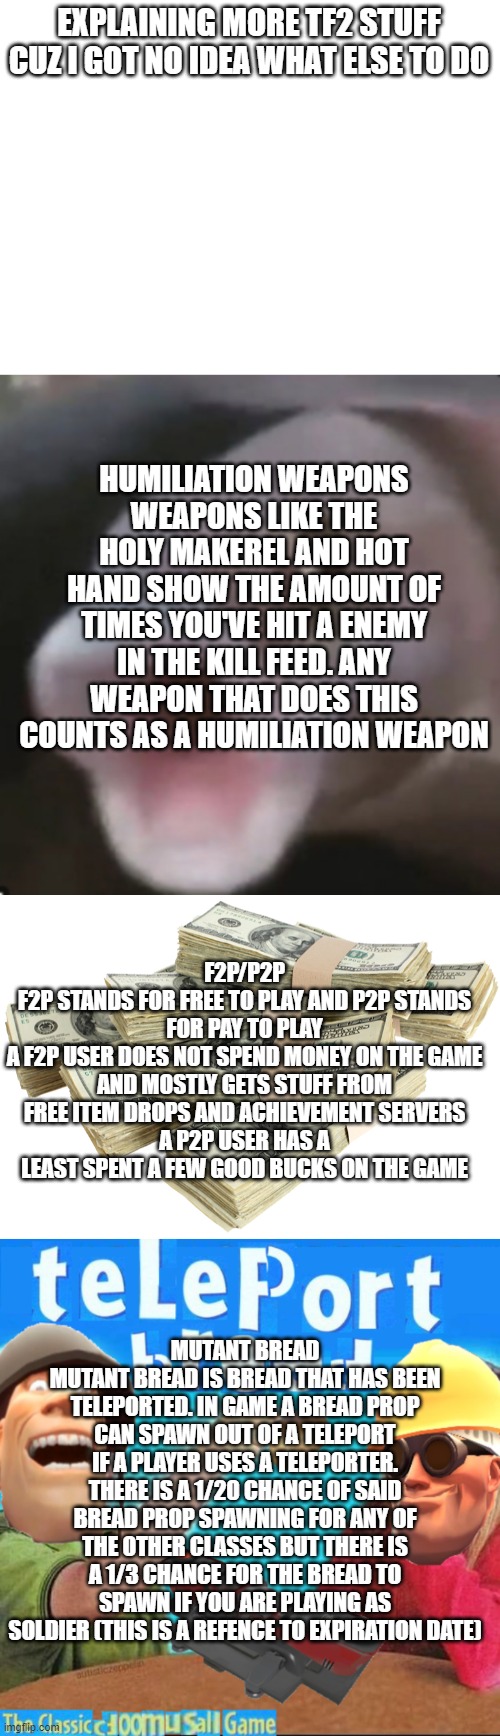 EXPLAINING MORE TF2 STUFF CUZ I GOT NO IDEA WHAT ELSE TO DO; HUMILIATION WEAPONS
WEAPONS LIKE THE HOLY MAKEREL AND HOT HAND SHOW THE AMOUNT OF TIMES YOU'VE HIT A ENEMY IN THE KILL FEED. ANY WEAPON THAT DOES THIS COUNTS AS A HUMILIATION WEAPON; F2P/P2P
F2P STANDS FOR FREE TO PLAY AND P2P STANDS FOR PAY TO PLAY
A F2P USER DOES NOT SPEND MONEY ON THE GAME AND MOSTLY GETS STUFF FROM FREE ITEM DROPS AND ACHIEVEMENT SERVERS
A P2P USER HAS A LEAST SPENT A FEW GOOD BUCKS ON THE GAME; MUTANT BREAD
MUTANT BREAD IS BREAD THAT HAS BEEN TELEPORTED. IN GAME A BREAD PROP CAN SPAWN OUT OF A TELEPORT IF A PLAYER USES A TELEPORTER. THERE IS A 1/20 CHANCE OF SAID BREAD PROP SPAWNING FOR ANY OF THE OTHER CLASSES BUT THERE IS A 1/3 CHANCE FOR THE BREAD TO SPAWN IF YOU ARE PLAYING AS SOLDIER (THIS IS A REFENCE TO EXPIRATION DATE) | image tagged in poggers fish,stack of money,teleport bread | made w/ Imgflip meme maker